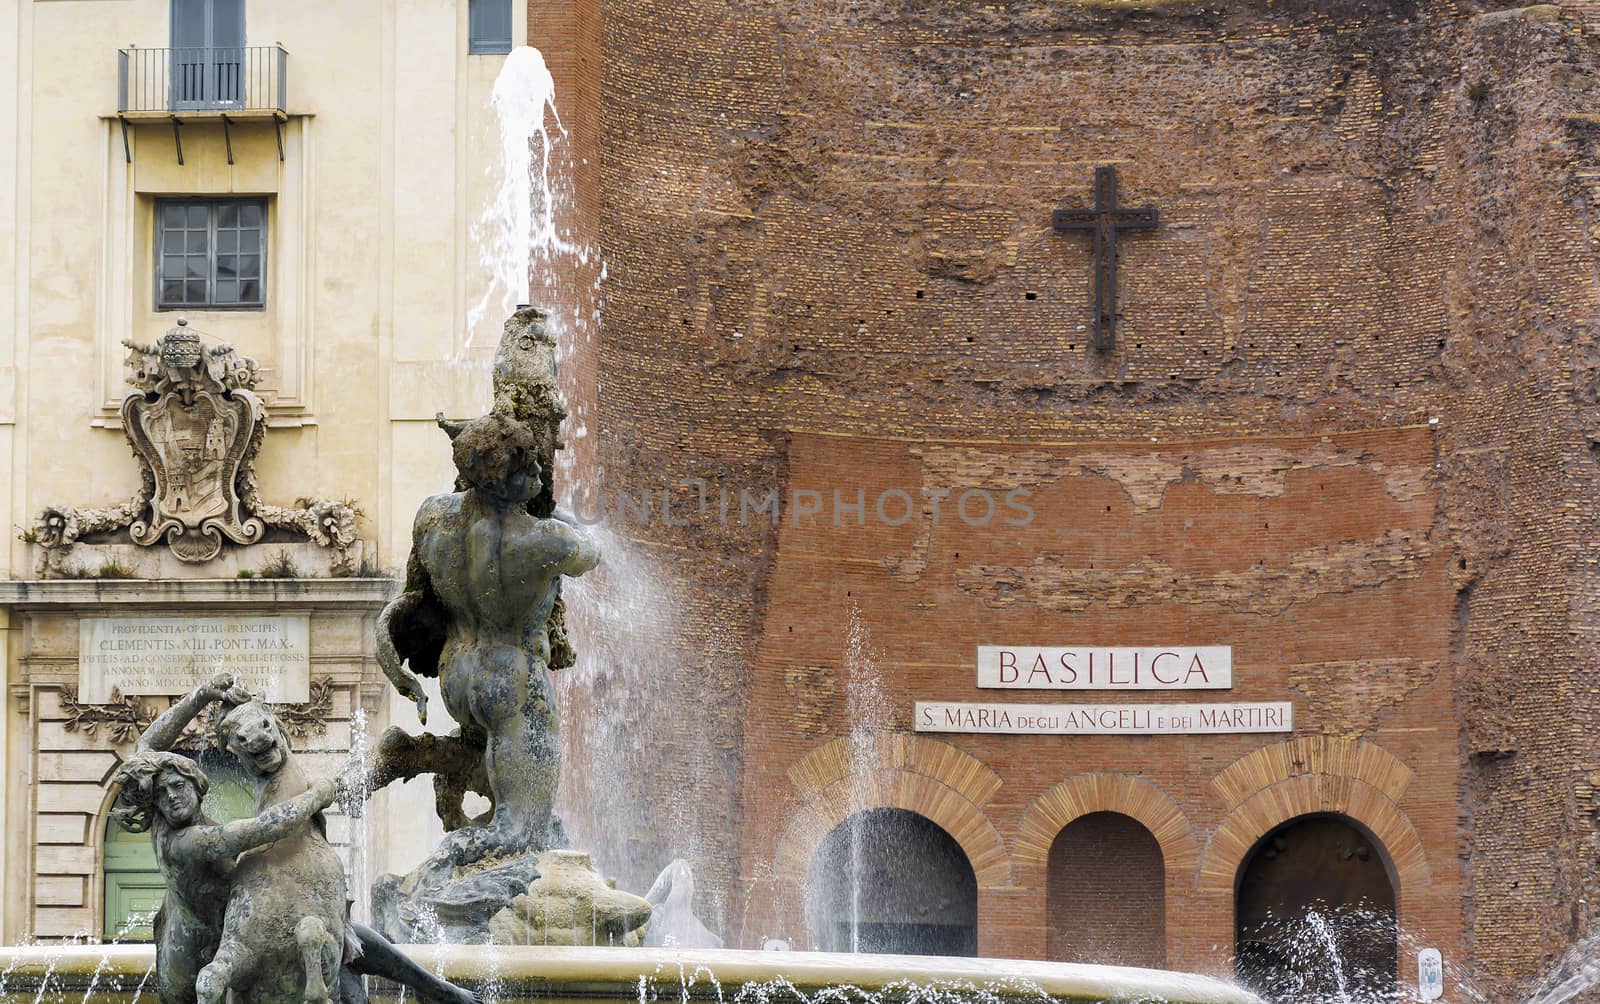 Detail of the fountain of Naiads in Piazza della Repubblica with the Basilica of St. Mary of the Angels and the Martyrs in background. Rome, Italy